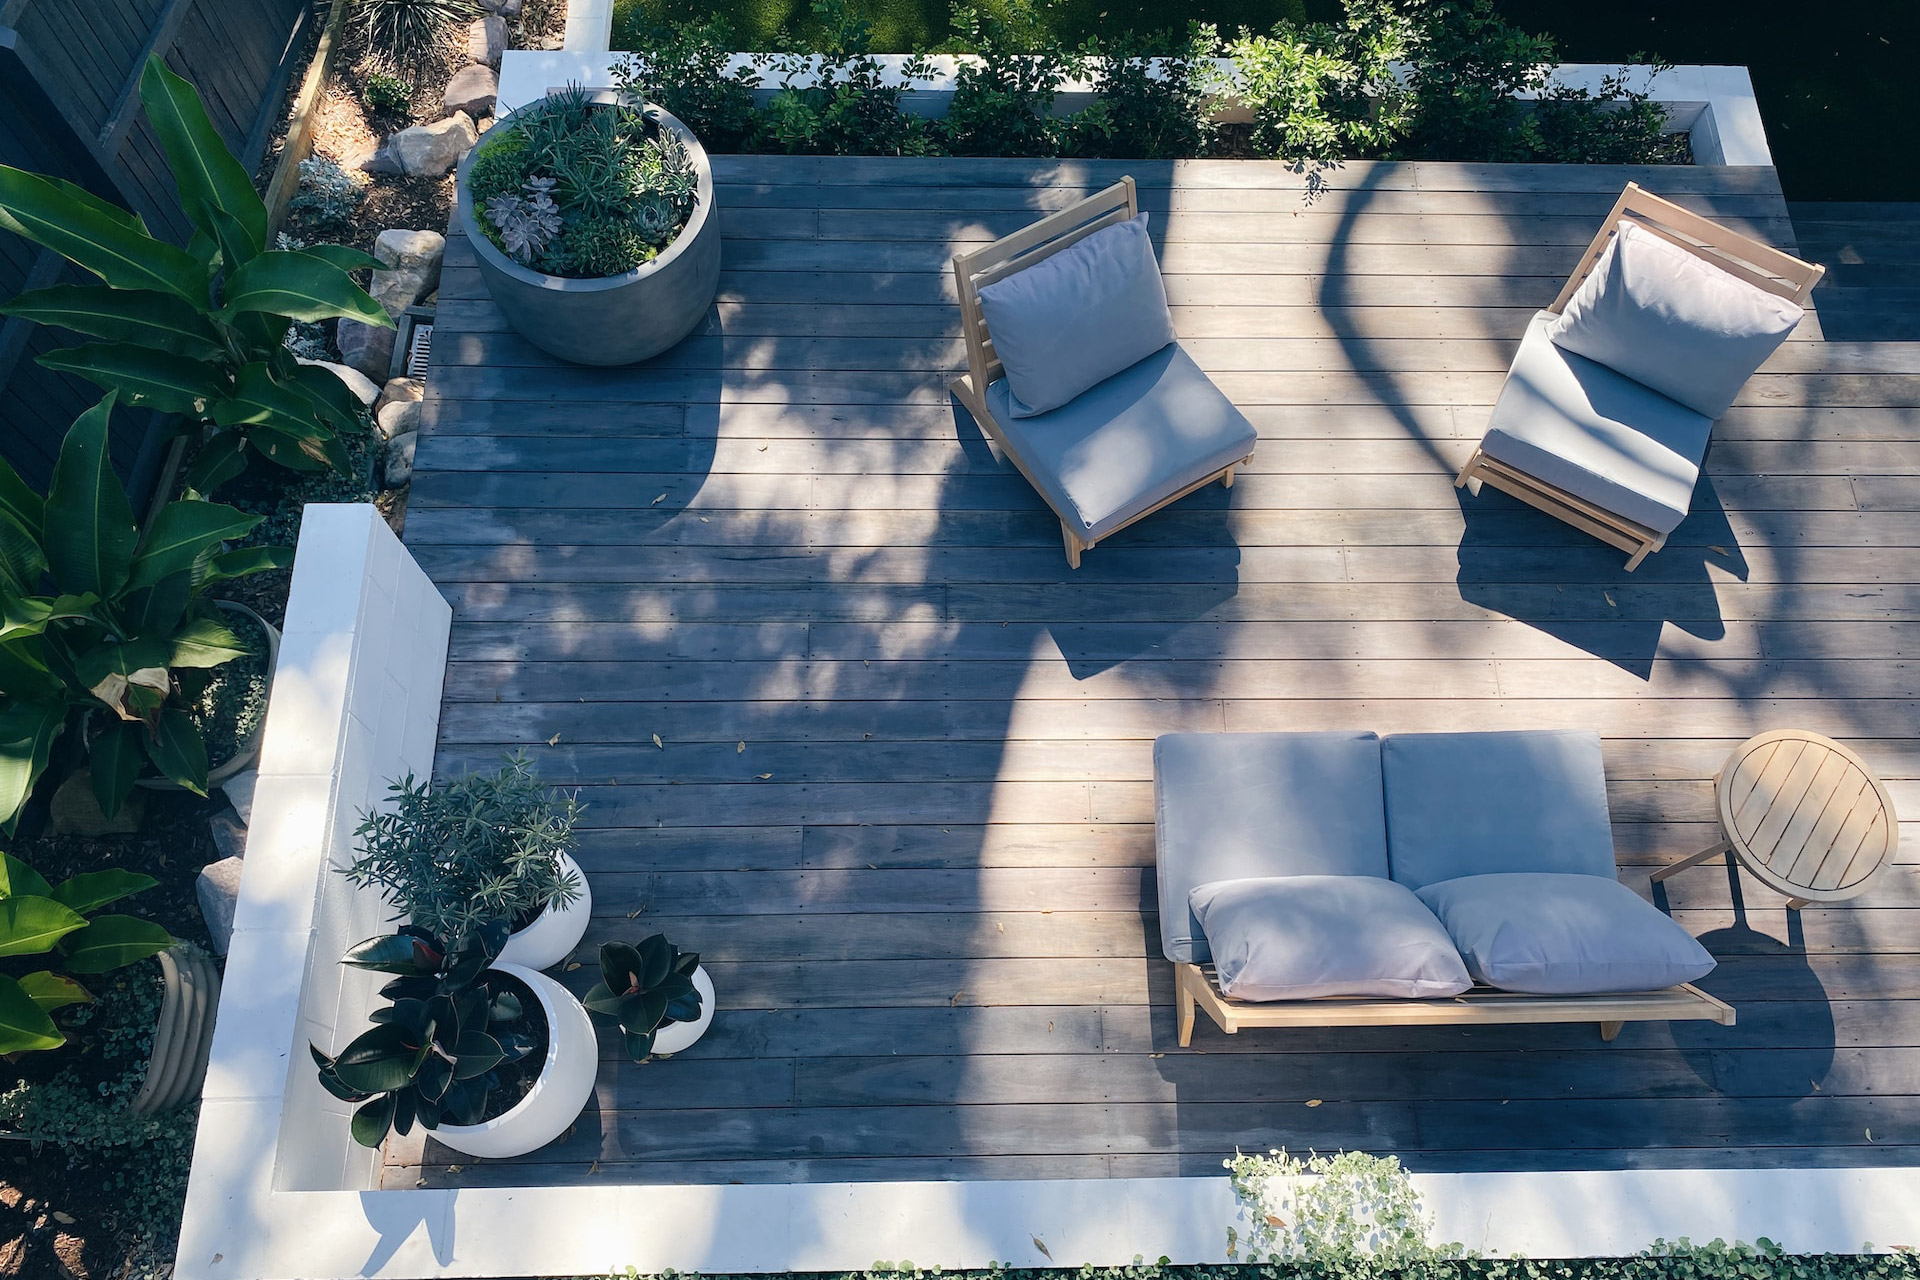 A beautifully designed outdoor garden decking area with a table and chairs.